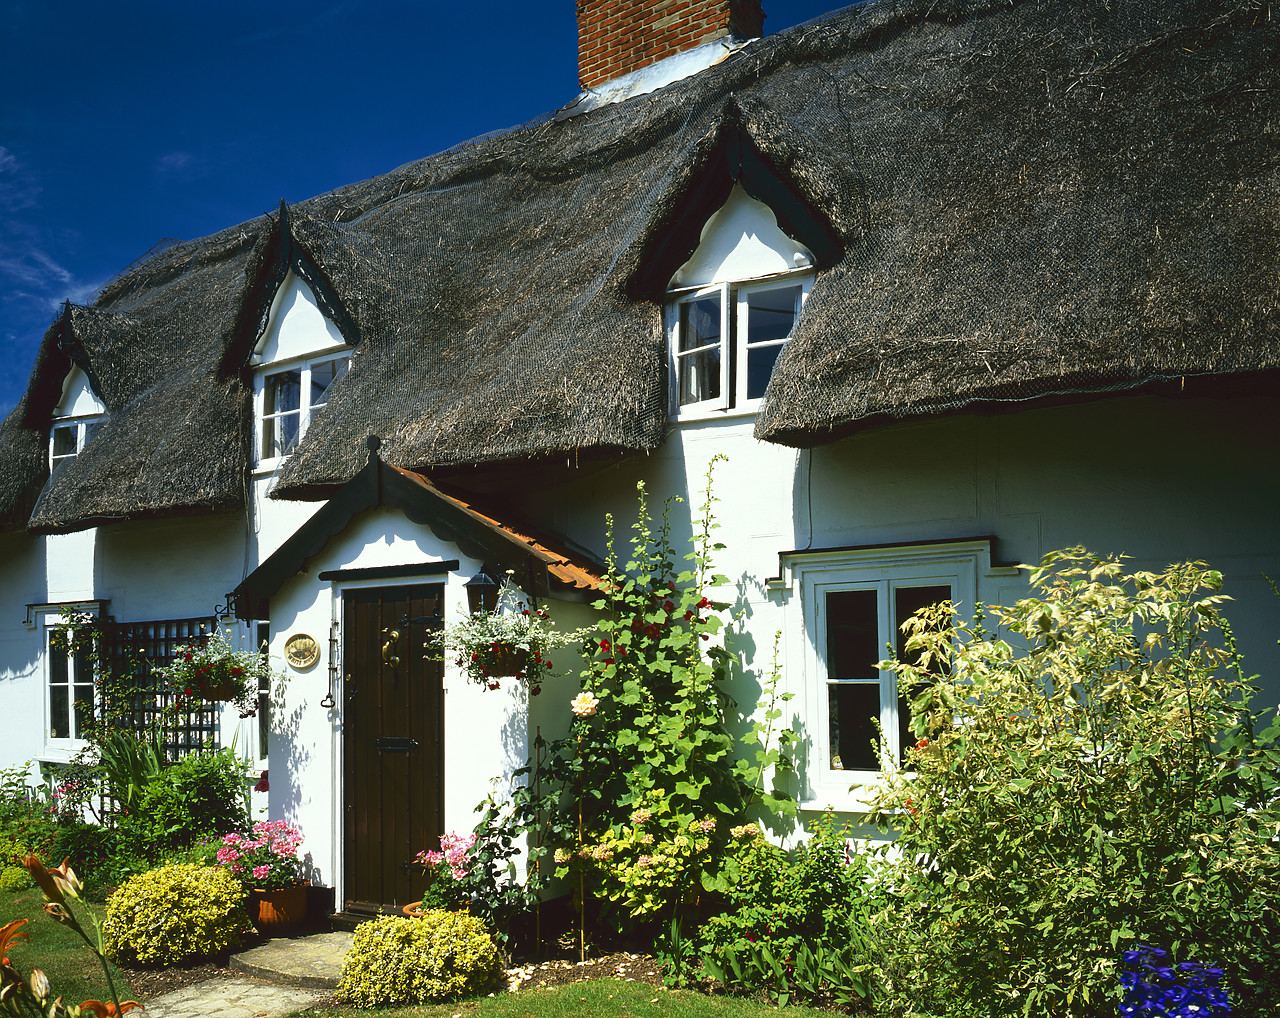 #030129-1 - The White House Cottage, Walsham le Willows, Suffolk, England